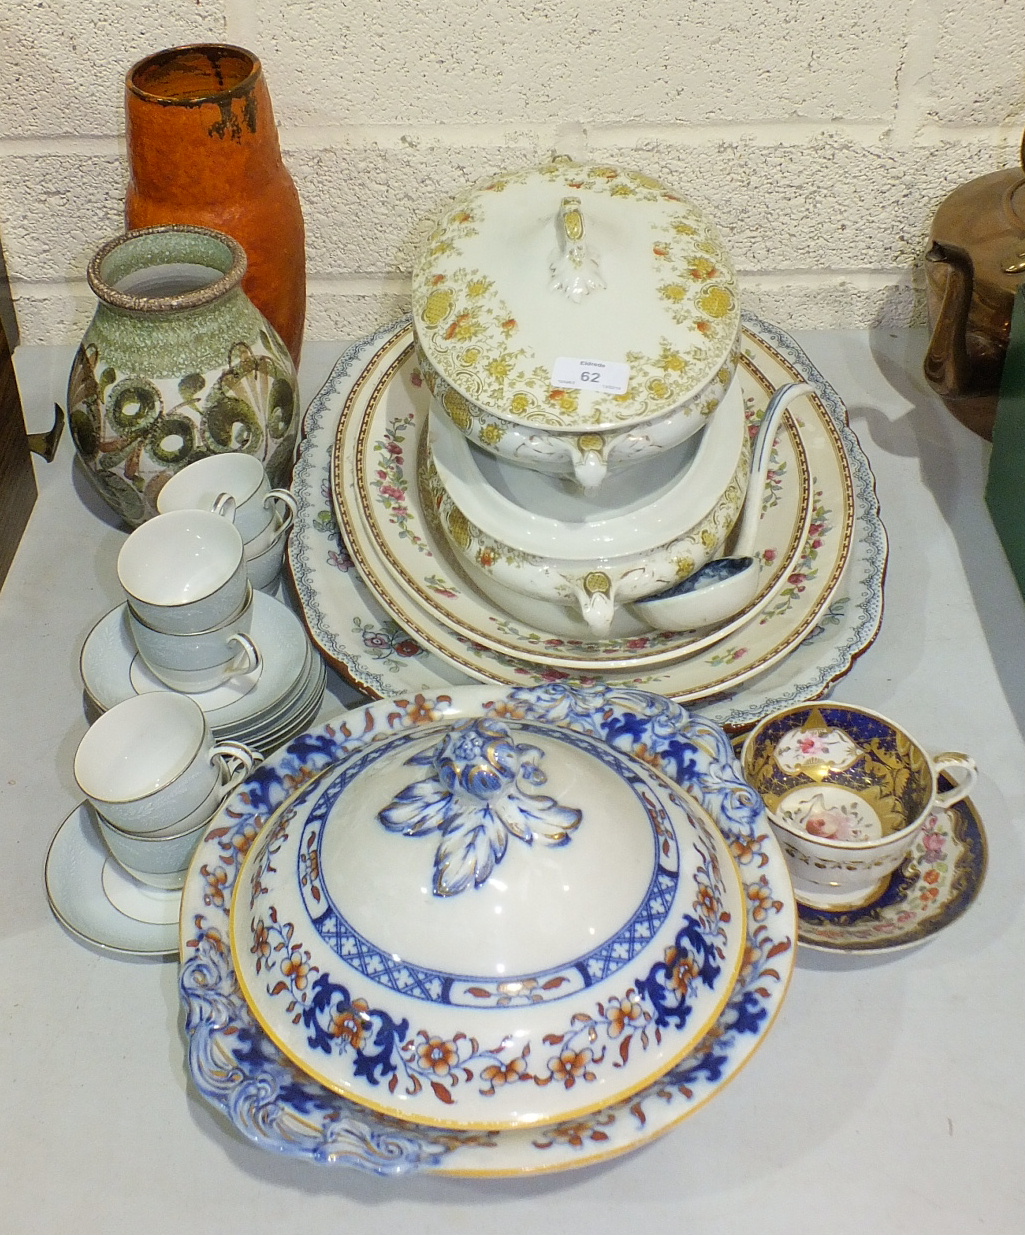 A collection of various tea and dinner ware and miscellaneous items.